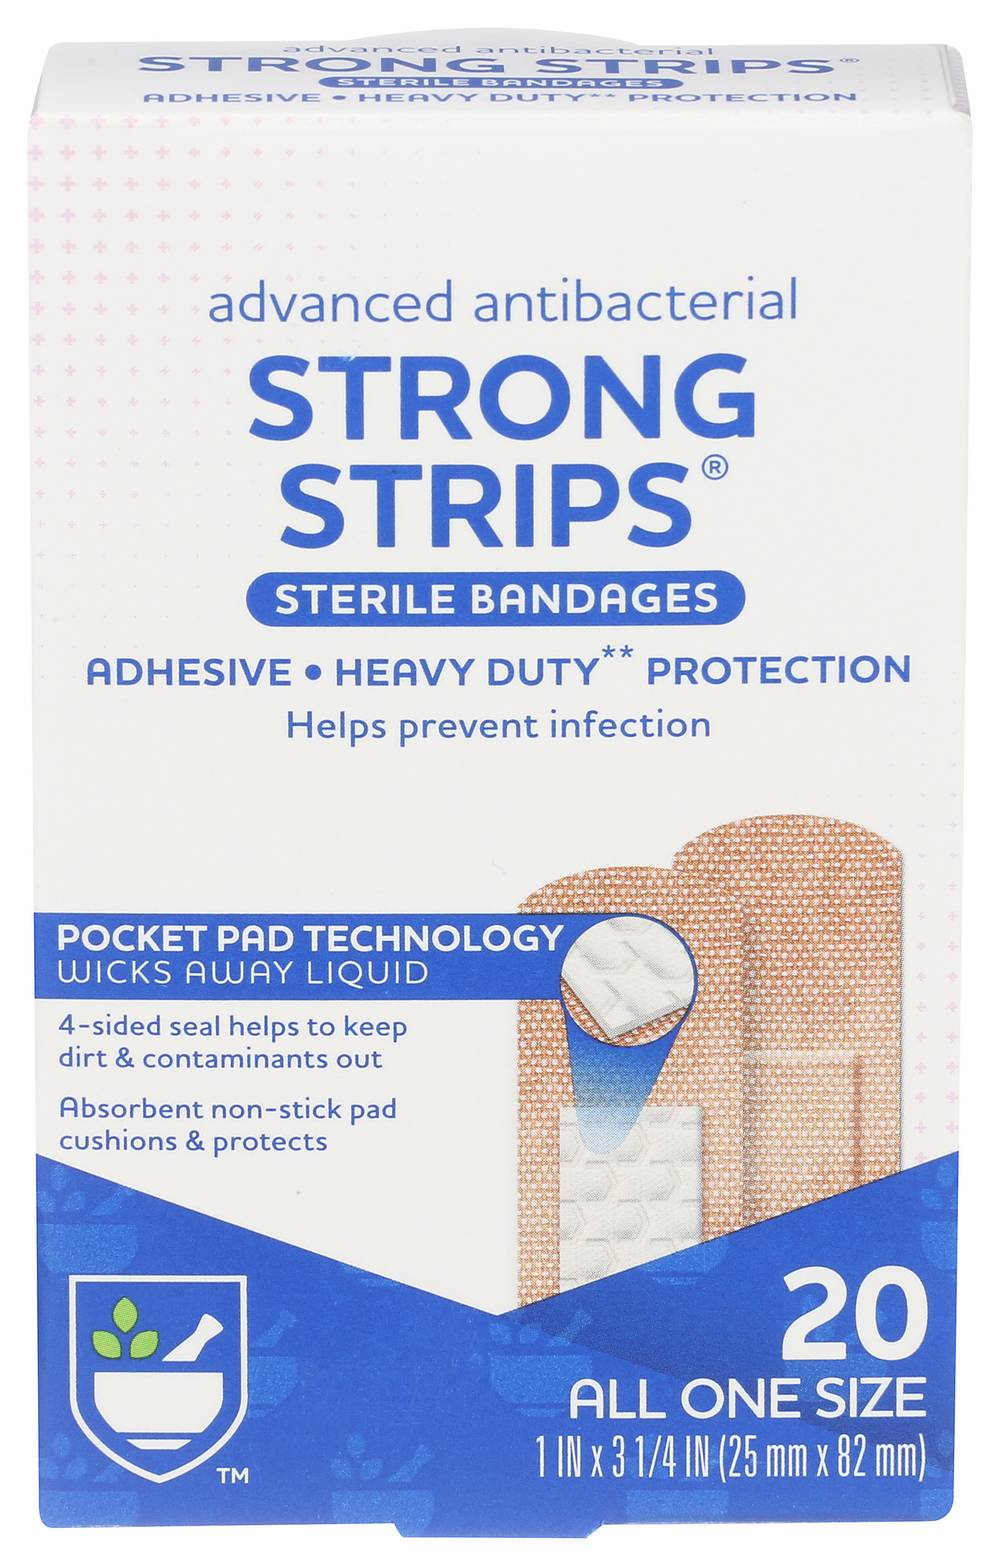 Rite Aid First Aid Advanced Antibacterial Strong Strips All One Size Bandages (20 ct)